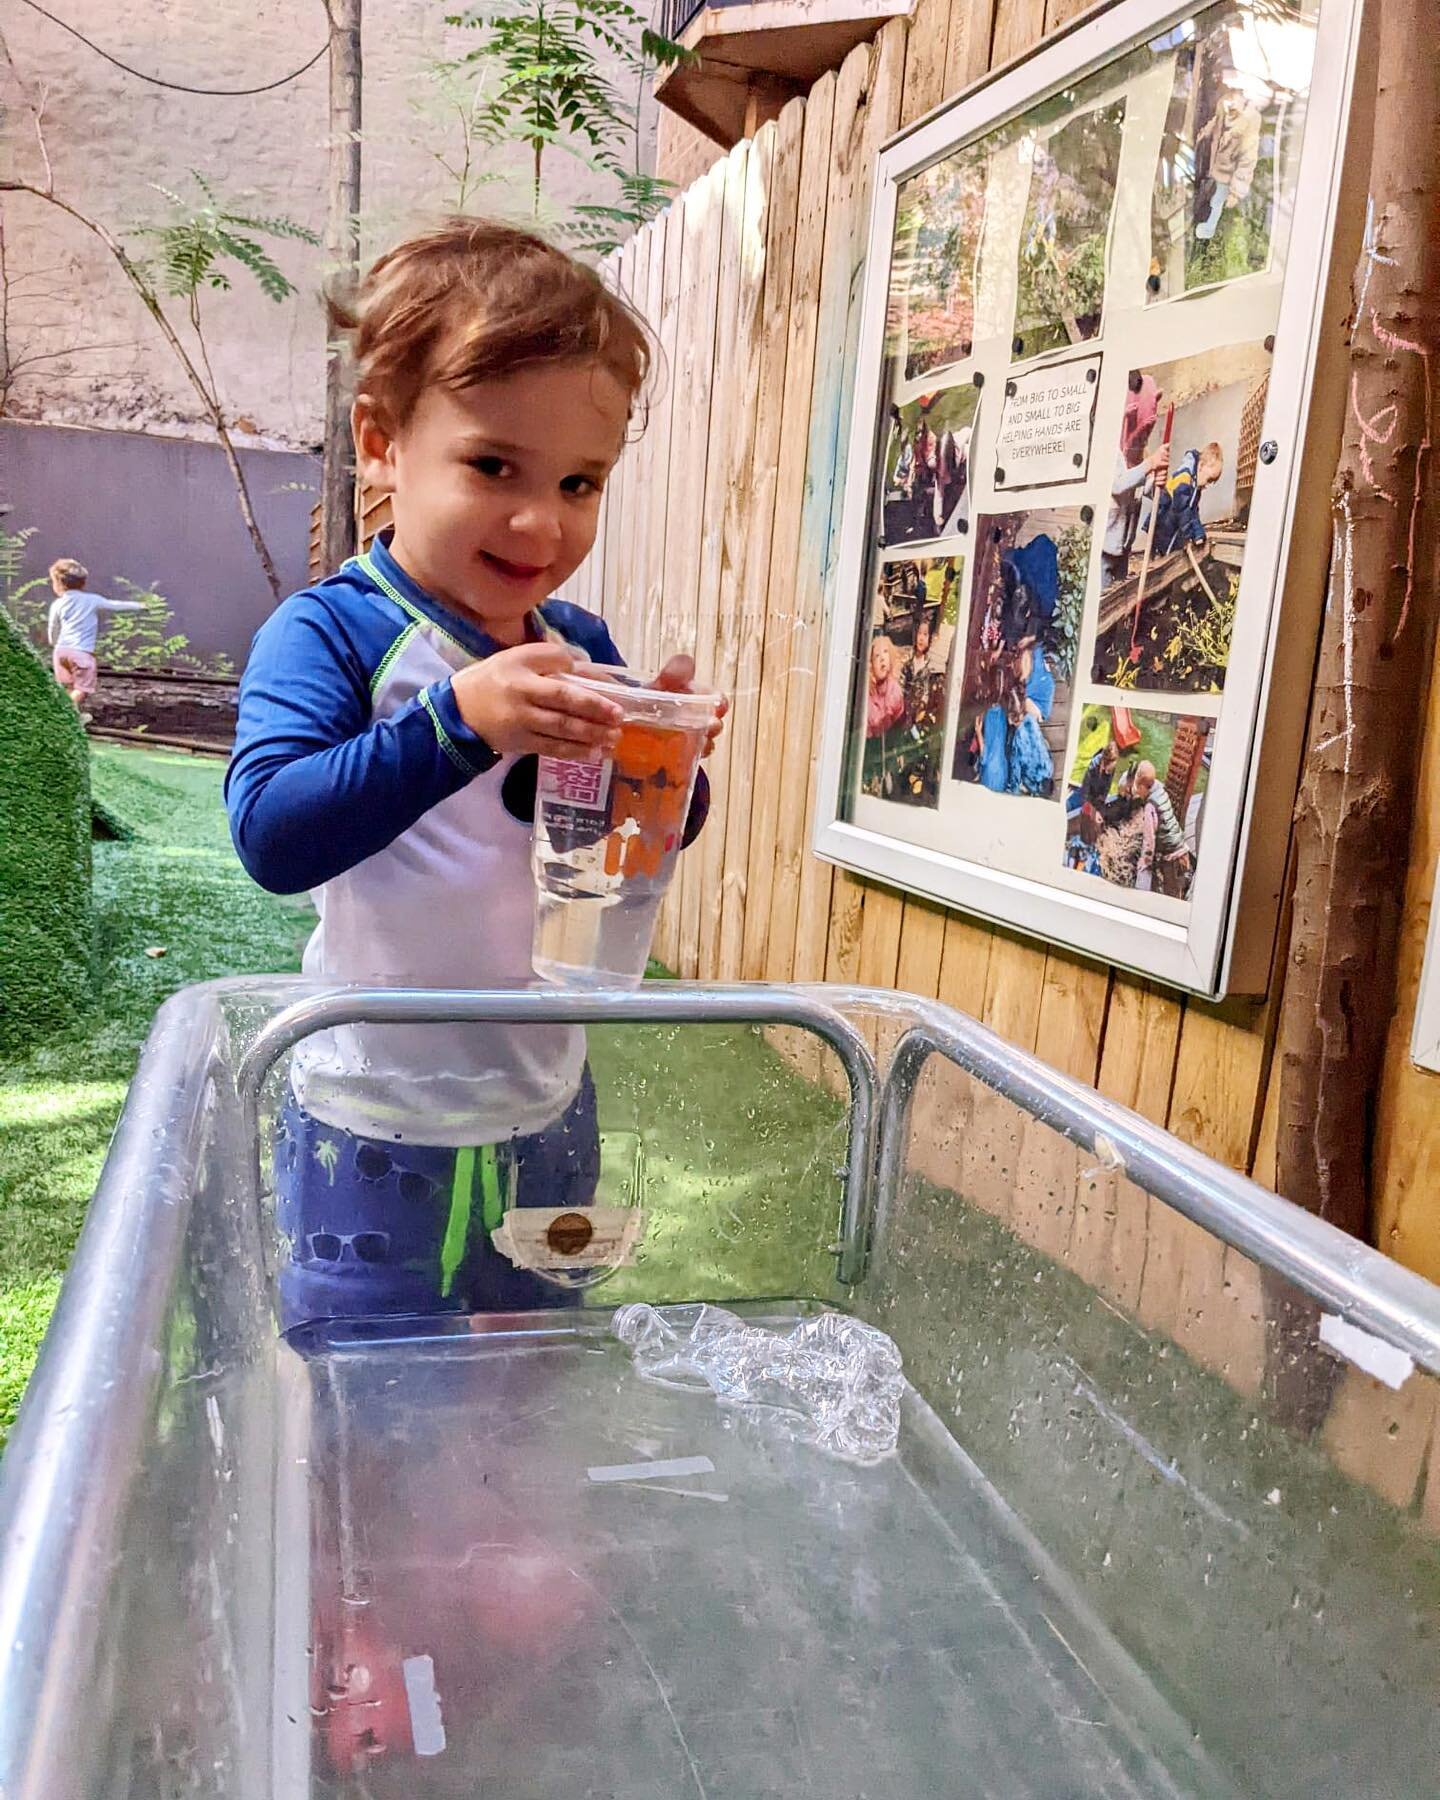 Handling buckets full of water strengthens our little ones&rsquo; motor skills while developing their hand-eye coordination and focus. Here&rsquo;s one of our little ones making a big splash at Summer Camp! Swipe 👉 for the fun result #waterplay #sum